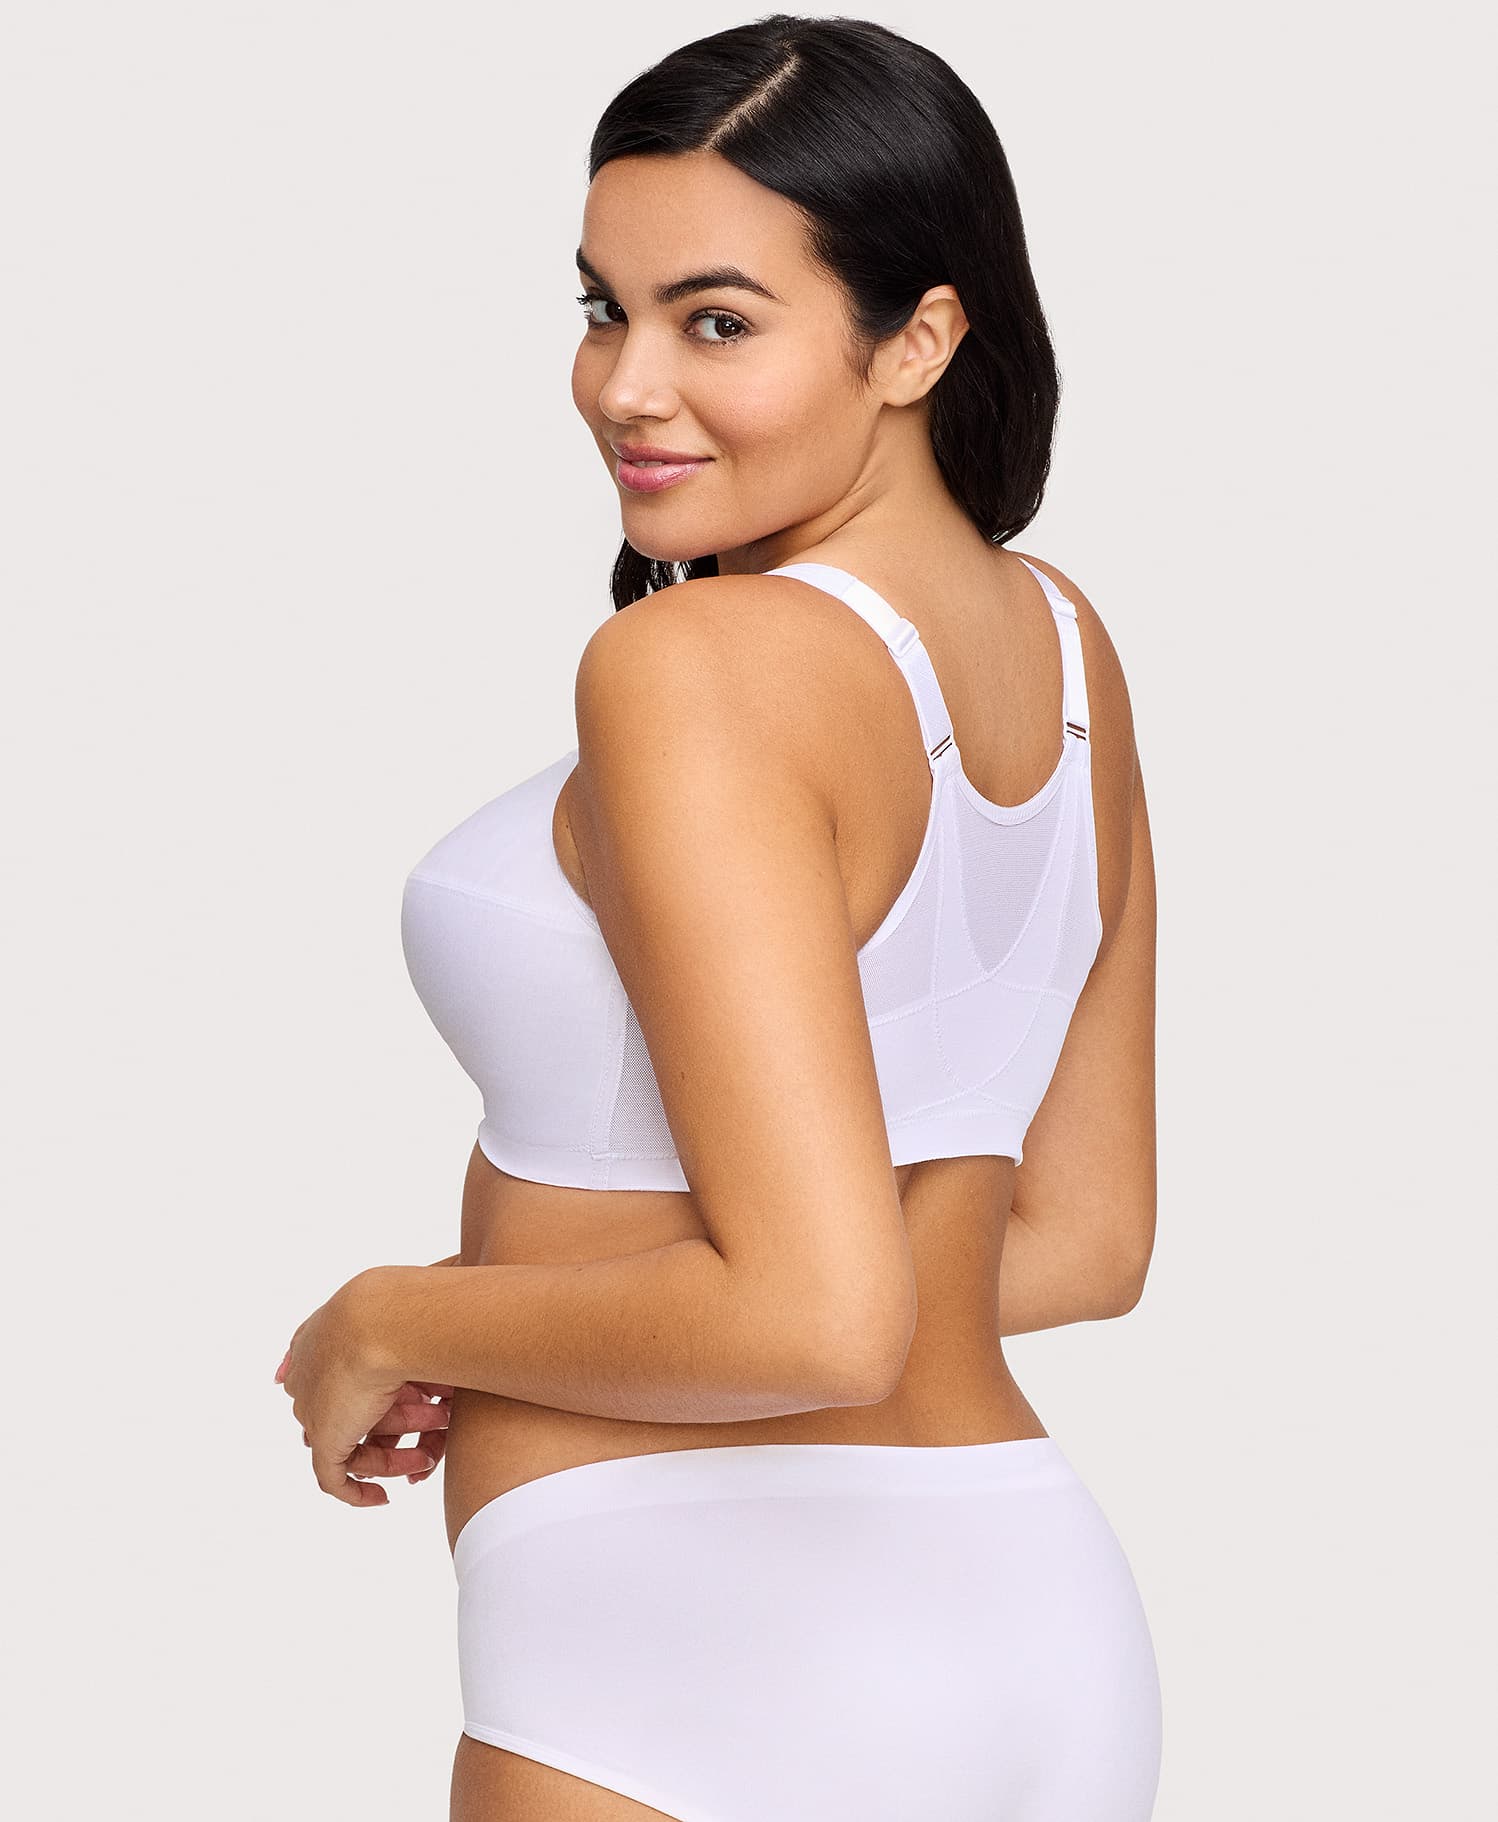 Women Plus Size Ultra-Thin Large Sports Bra Cup Tops White 36F